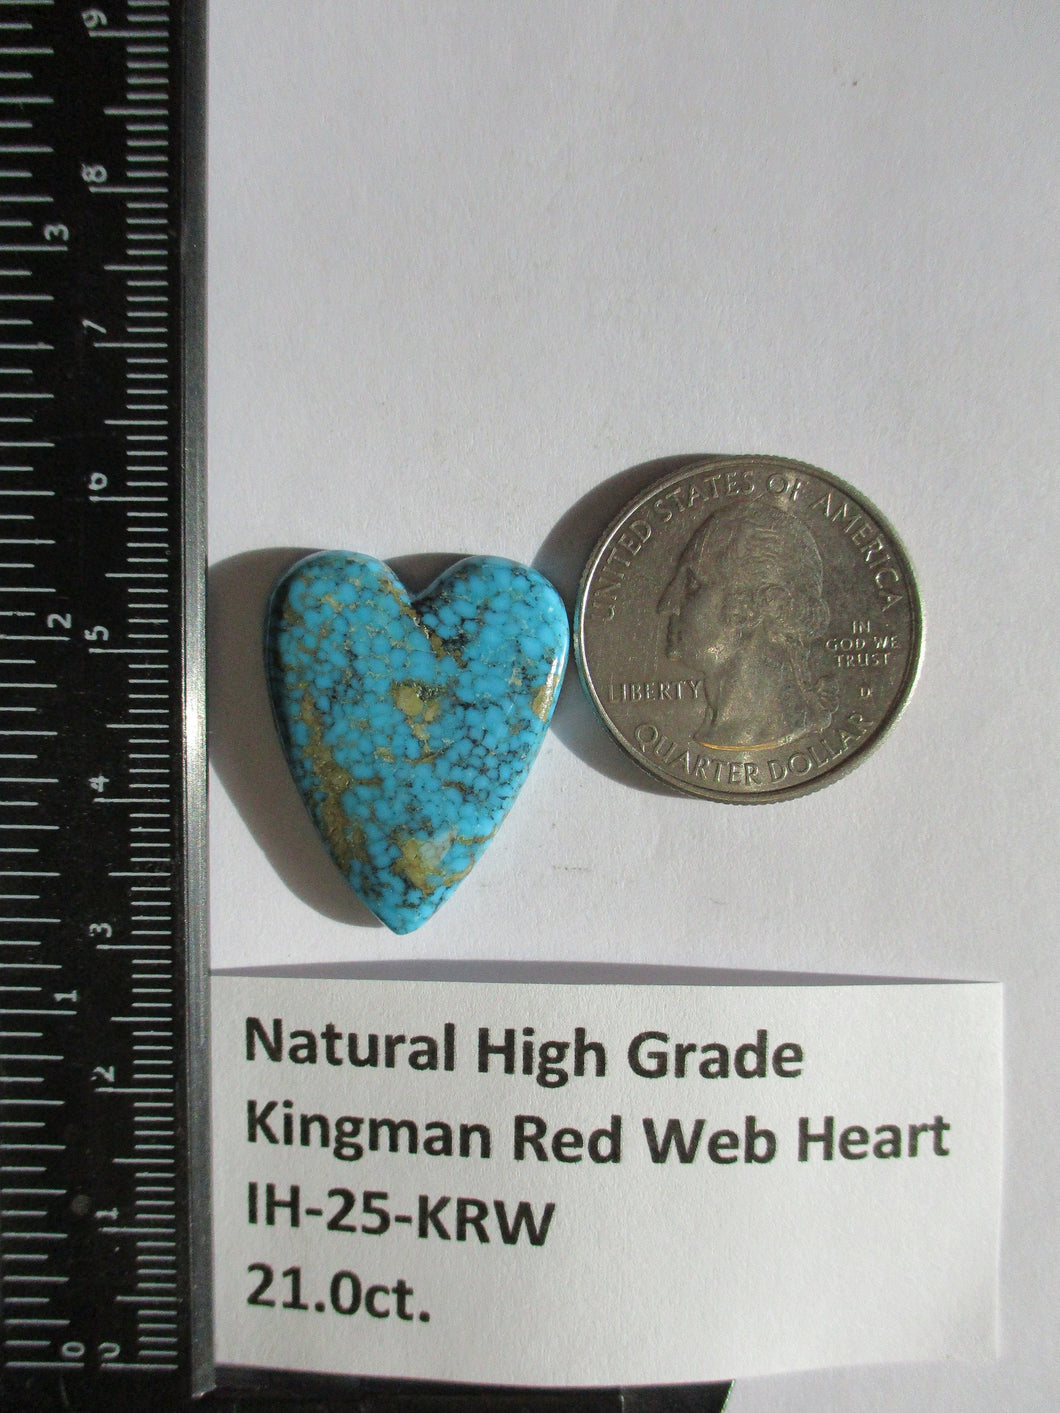 21.0 ct. (27x21.5x5mm) 100% Natural High Grade Kingman Red Web Turquoise Heart Cabochon Gemstone, # IH 25